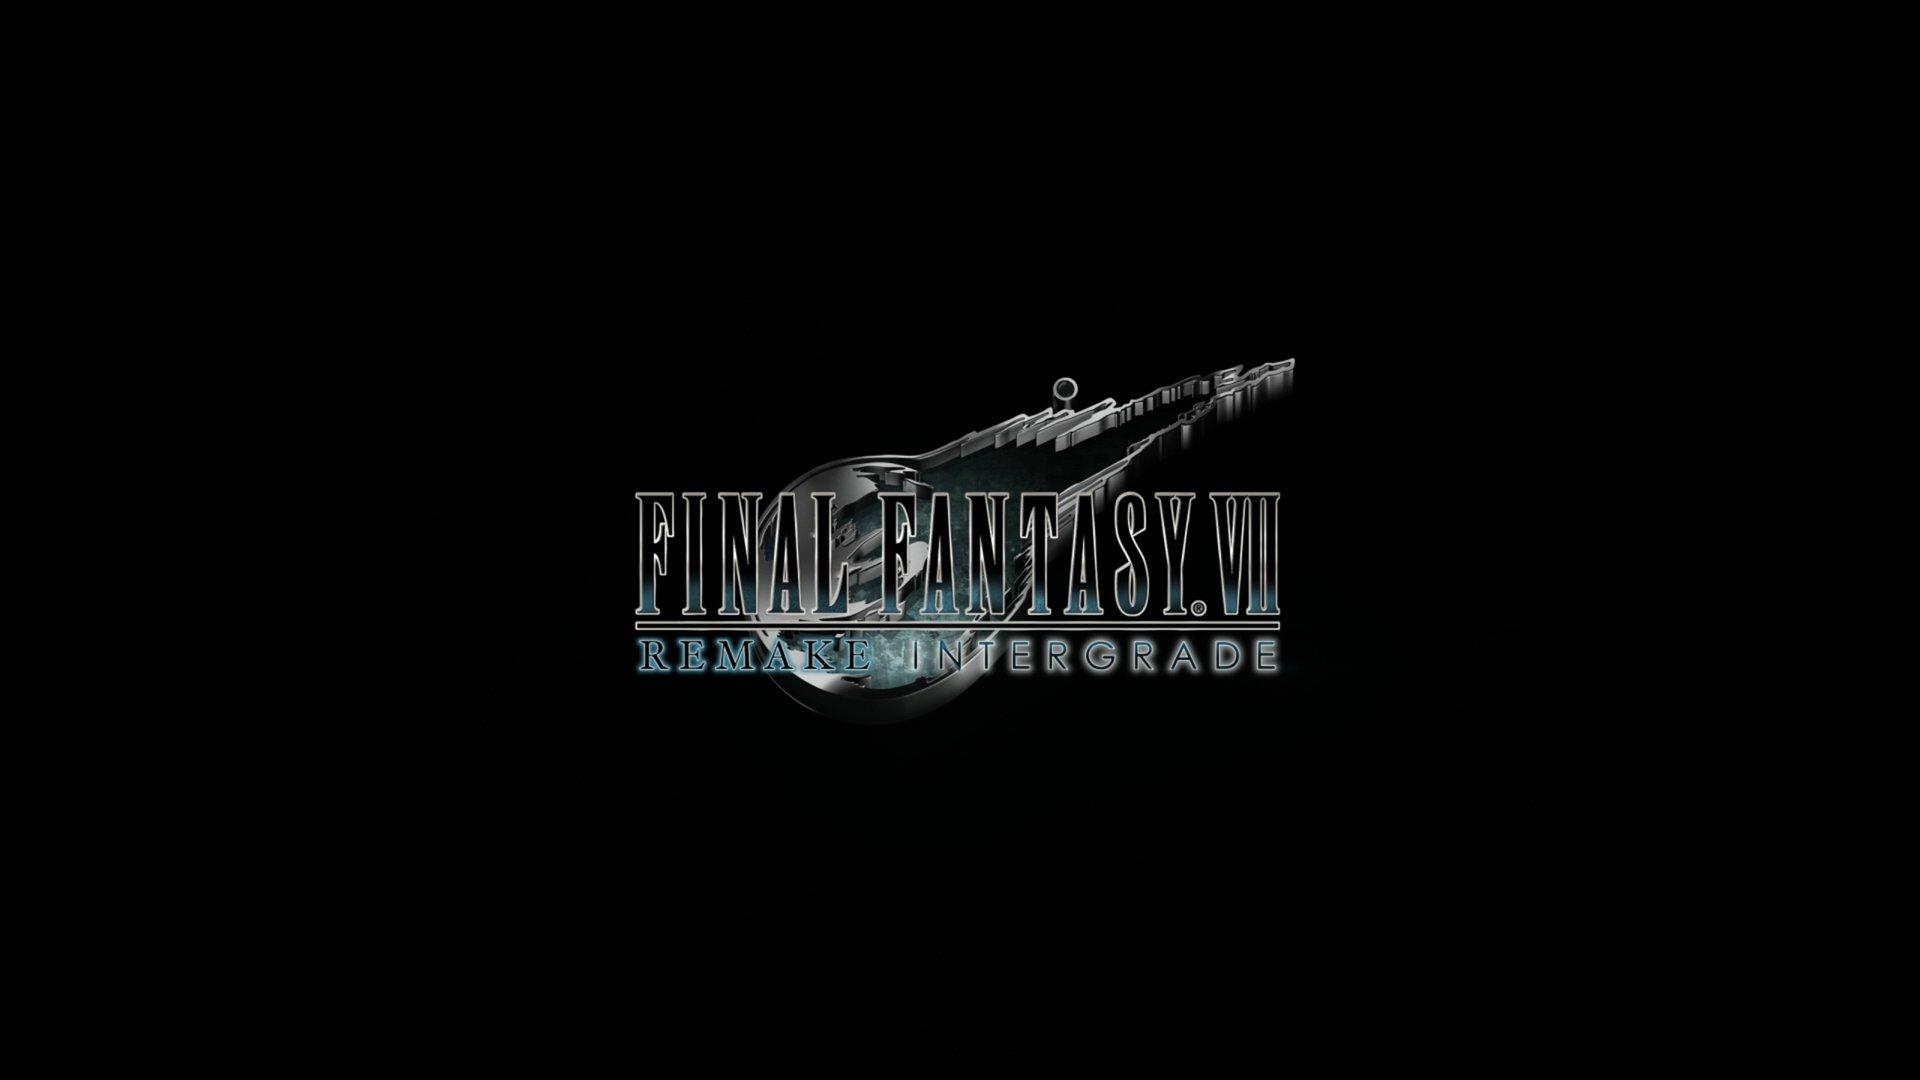 Final Fantasy 7 Remake: Intergrade announced for PS5 with June release date